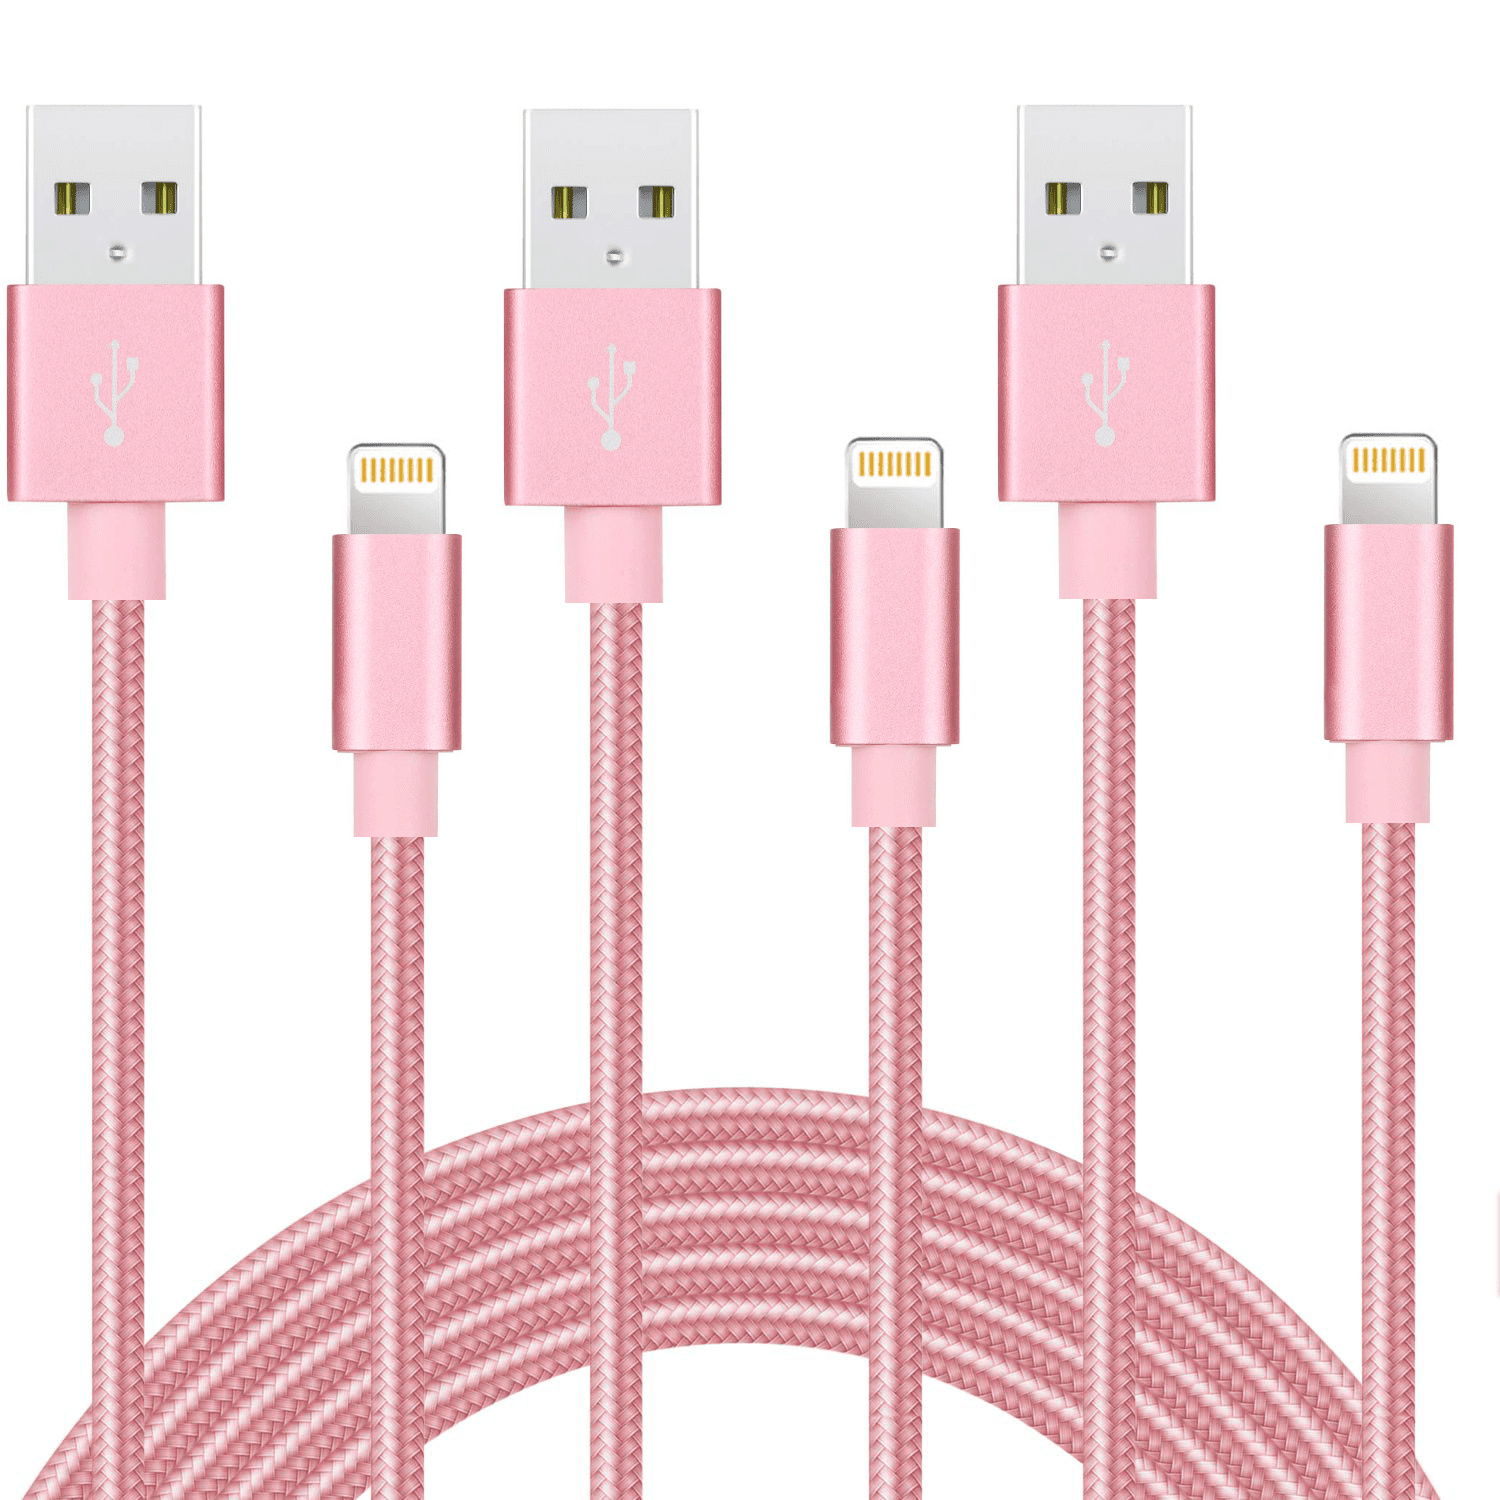 made for iPhone Chargers white 3.2ft Premium Nylon braided Lightning Cable durable & anti-tangle iPad Pro Air 2 and More iPhone Xs/XS Max/XR/X / 8/8 Plus / 7/7 Plus / 6/6 Plus / 5s 